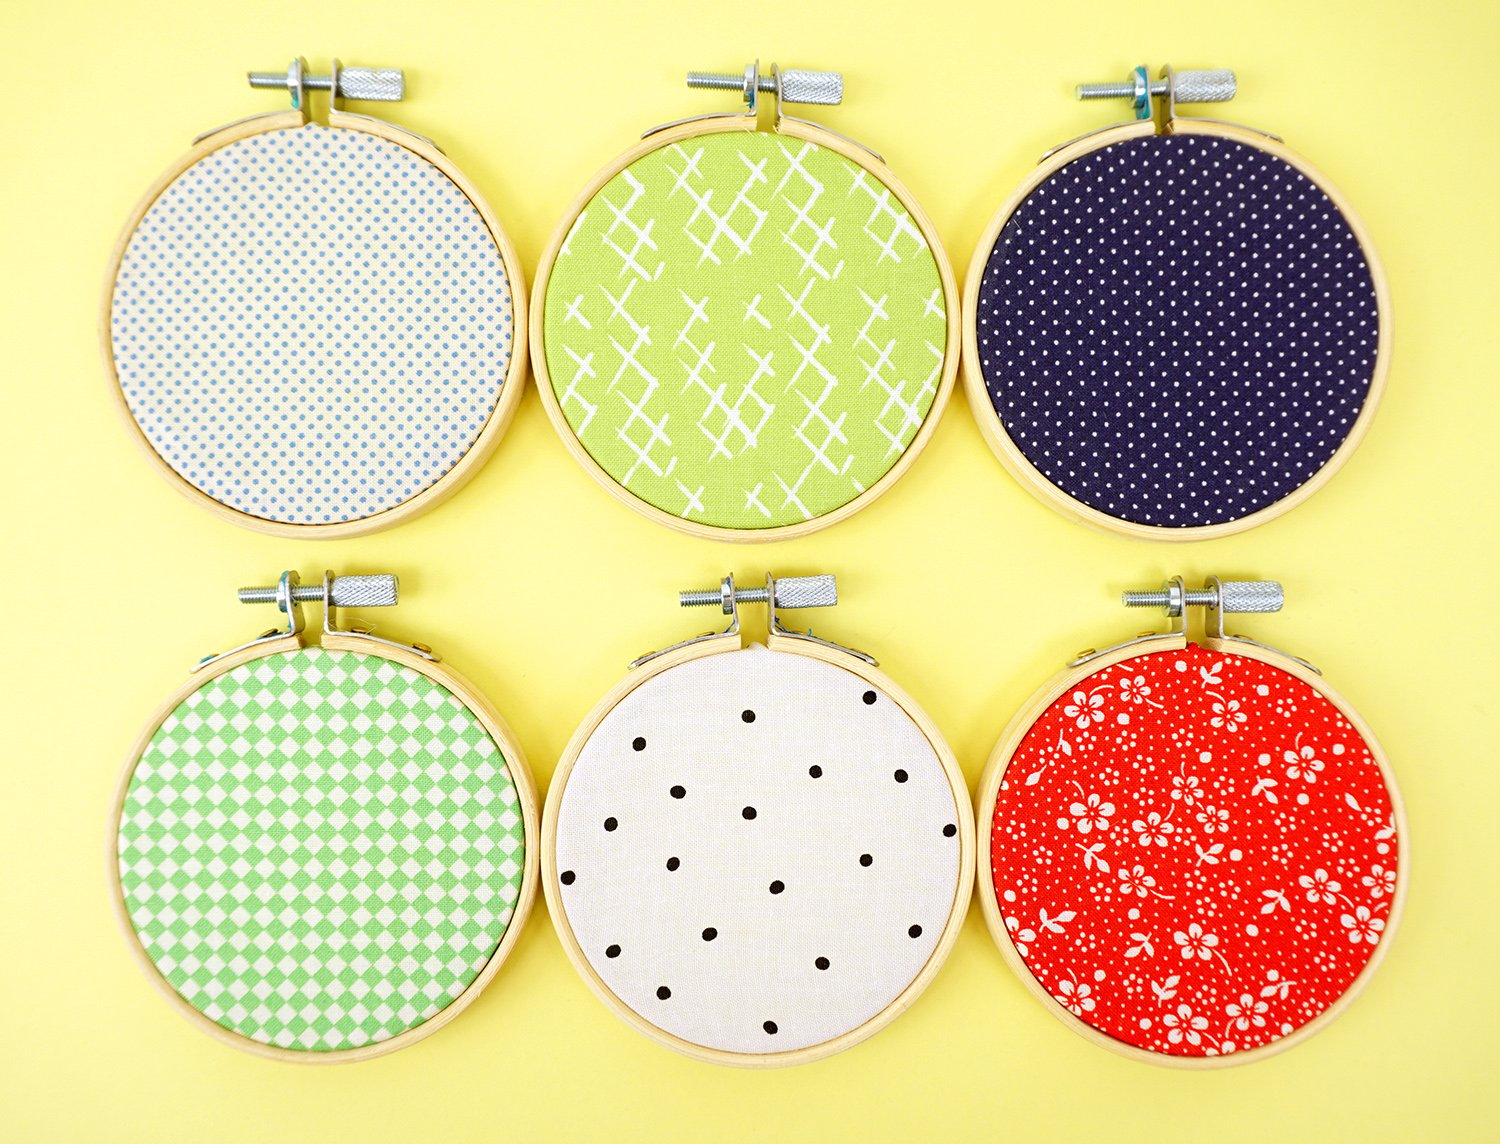 various patterns inside of embroidery hoops